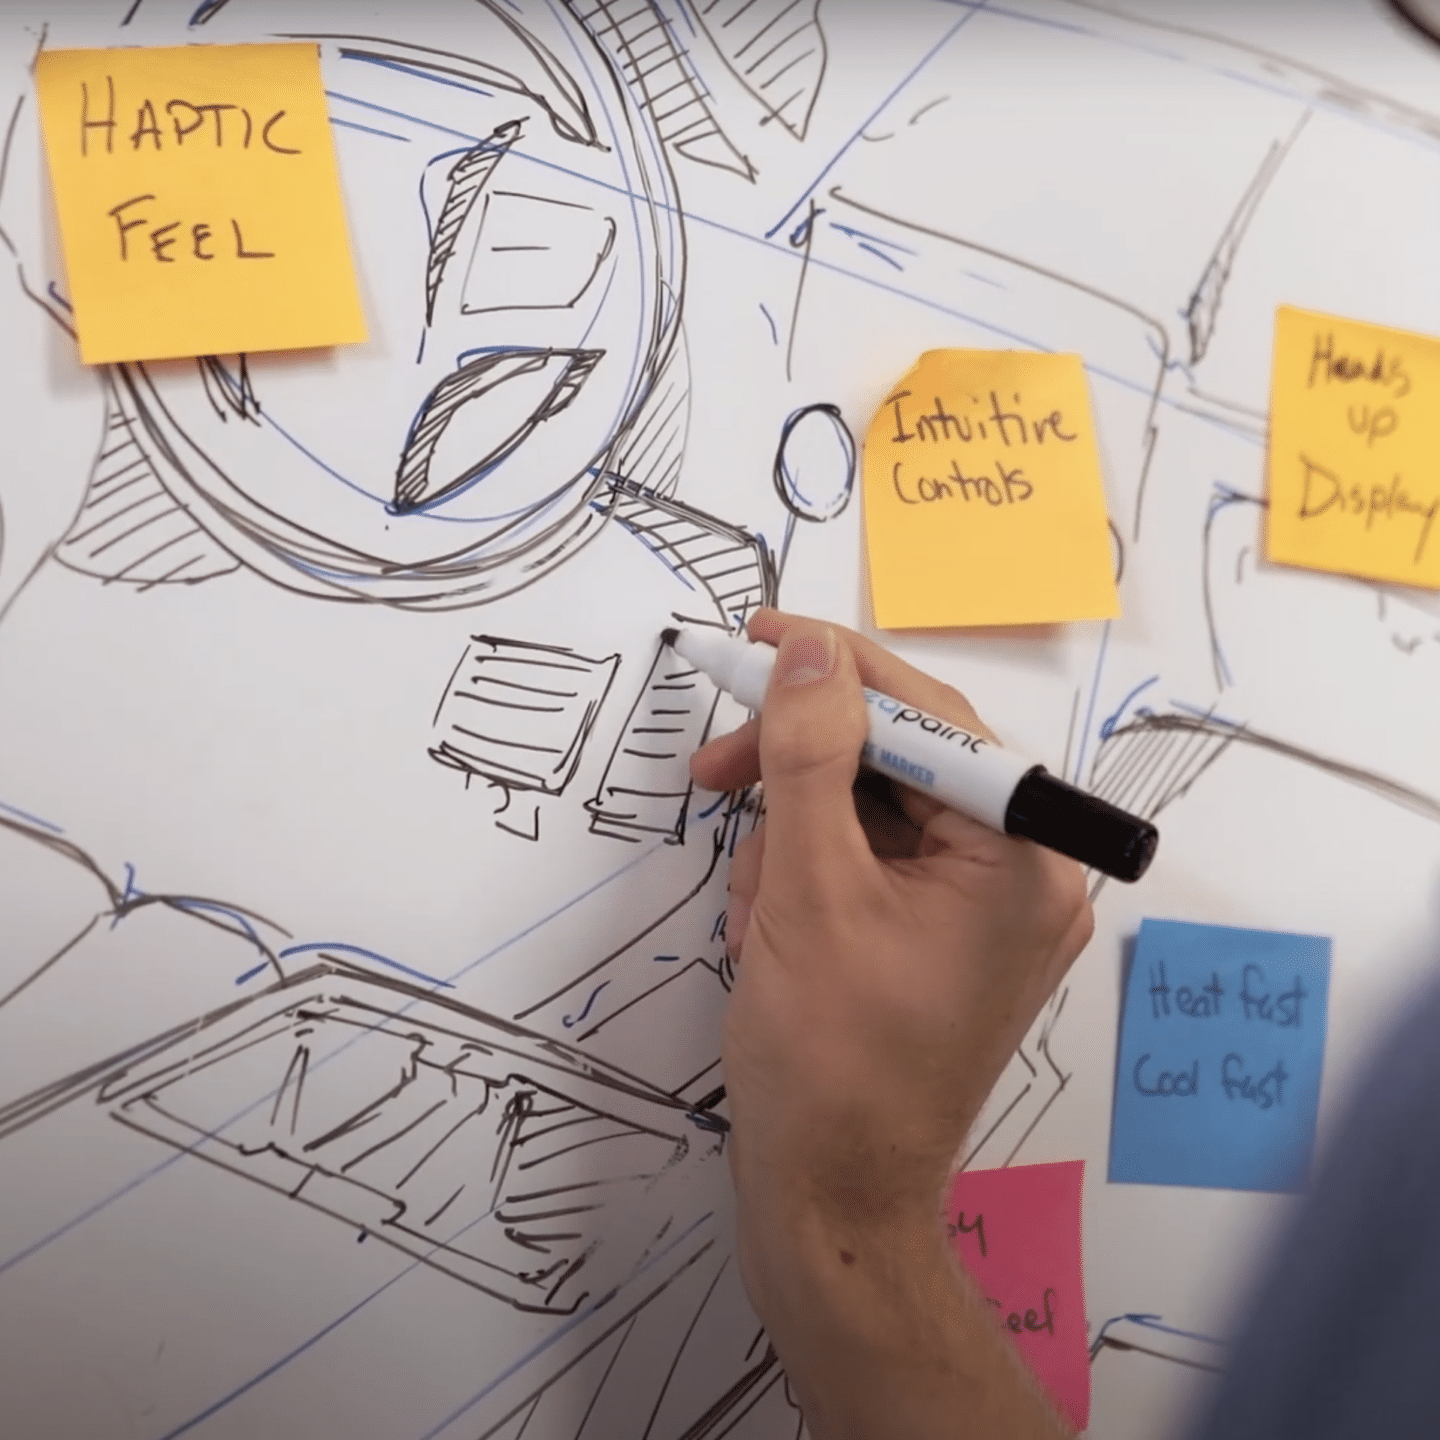 Industrial designer drawing on a whiteboard